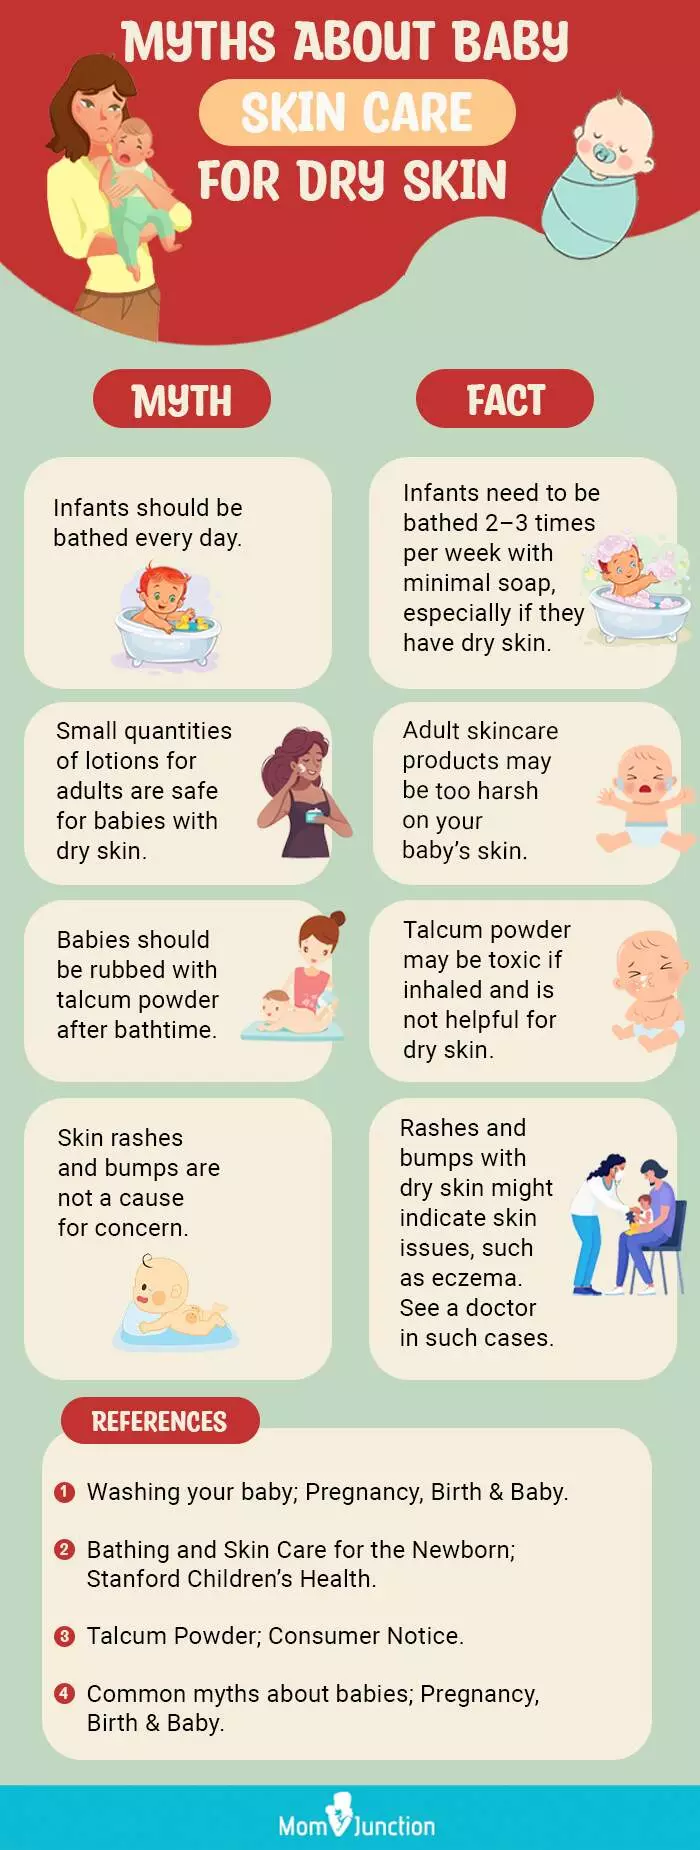 myths about baby skin care for dry skin (infographic)